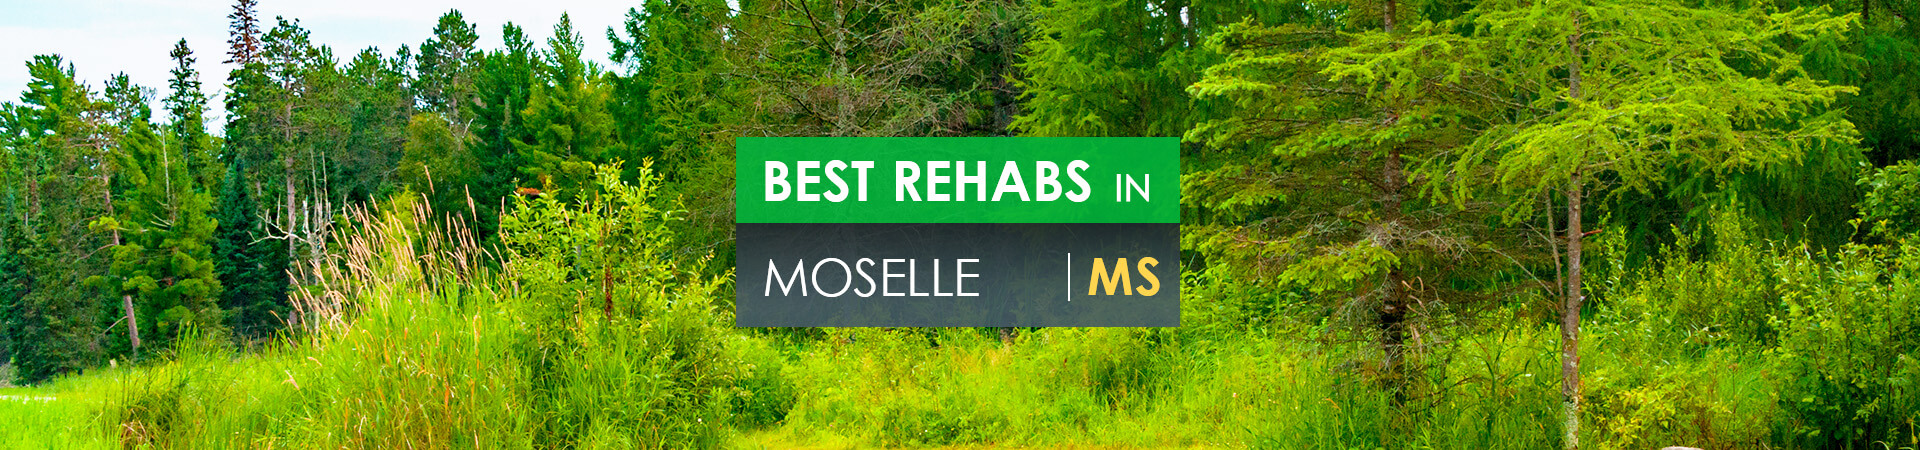 Best rehabs in Moselle, MS